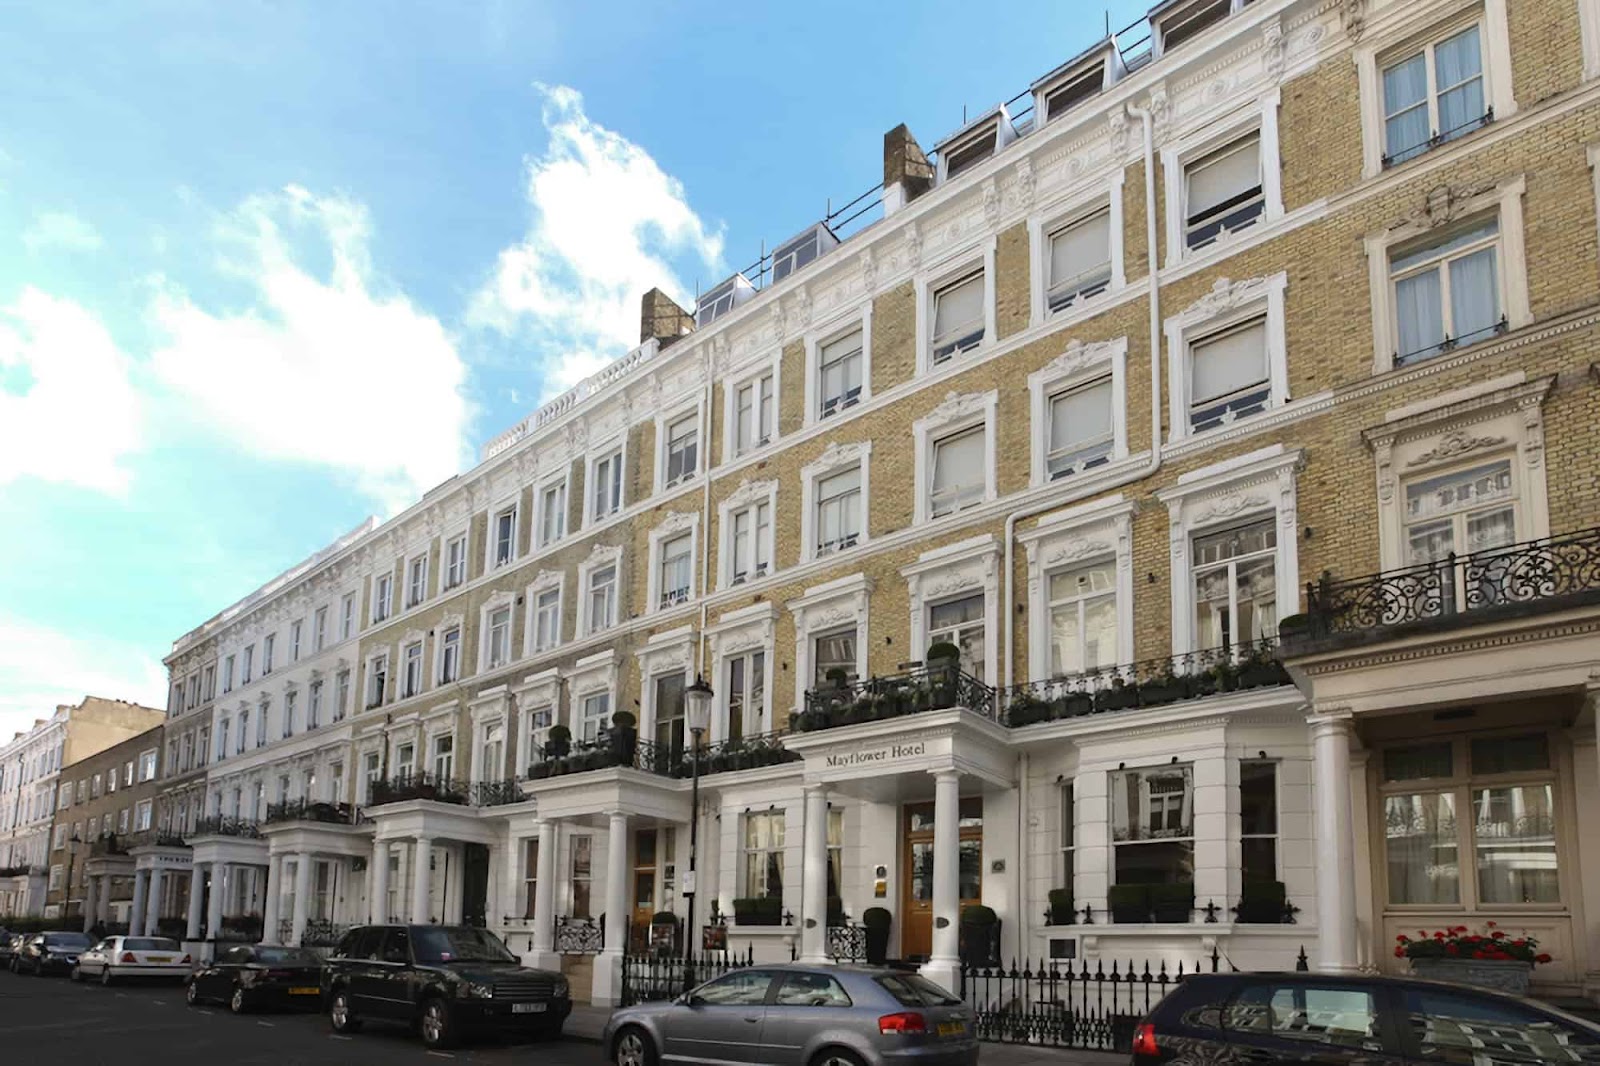 Mayflower Hotel and Apartments London: 6 Types of Rooms - Apartement ...